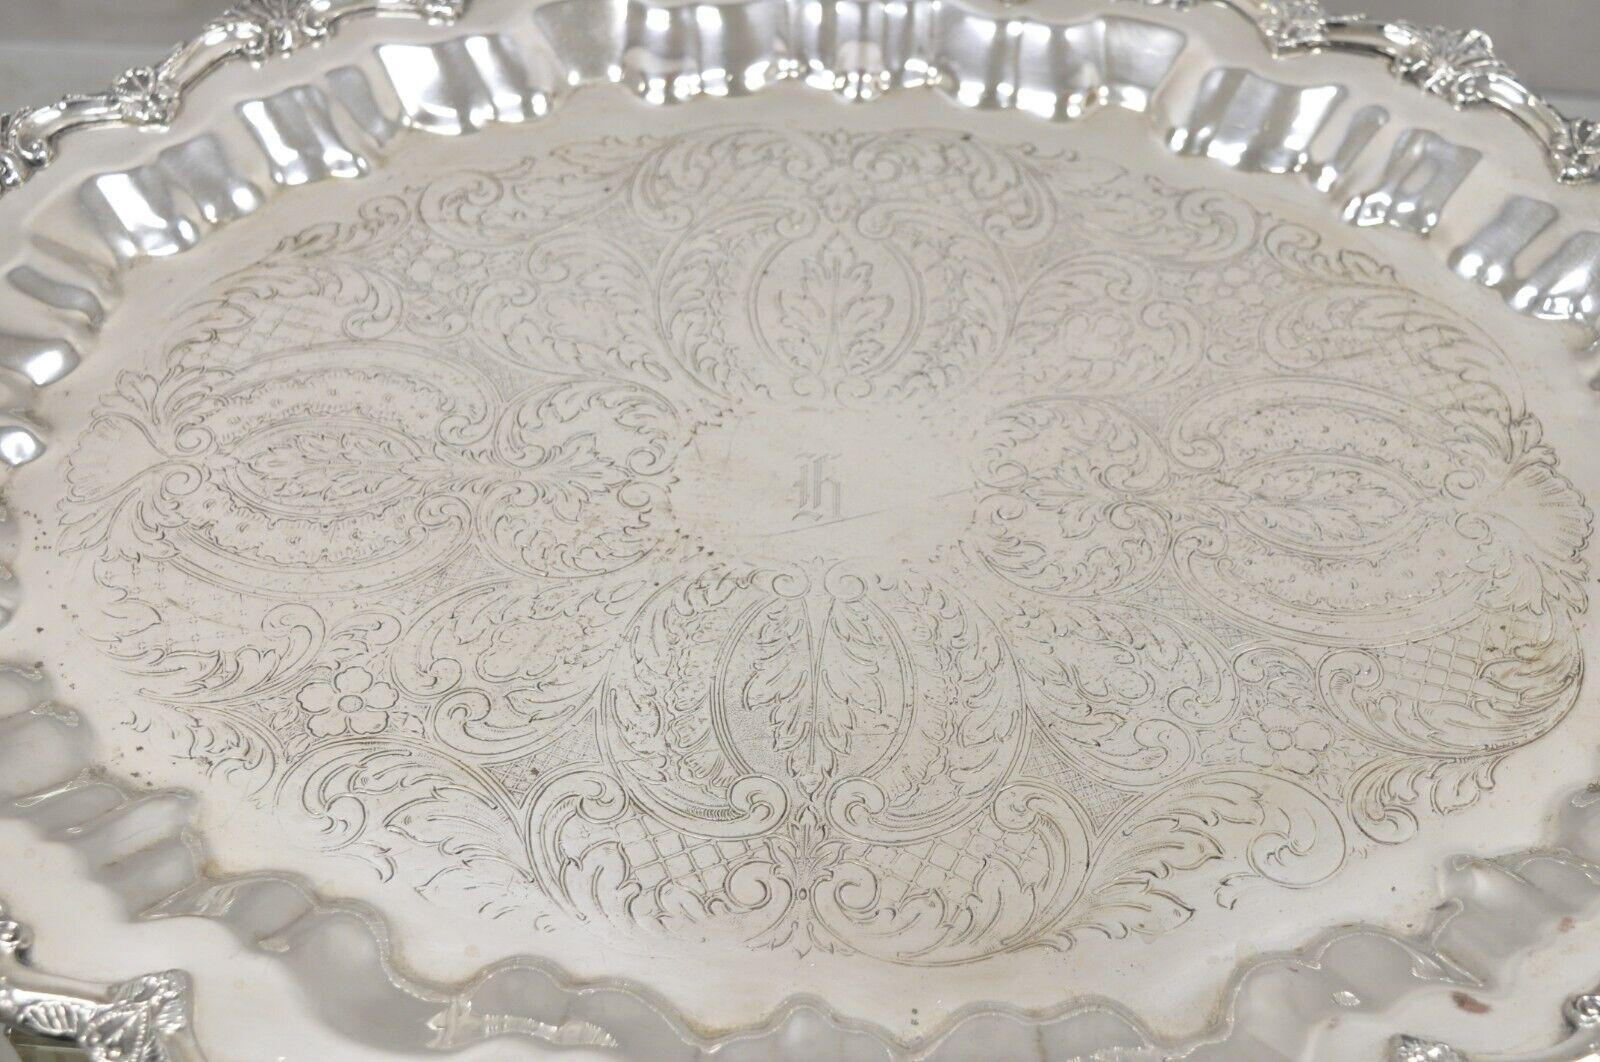 Prospect Silver Co Silver Plated Victorian Style Twin Handle Serving Platter For Sale 1